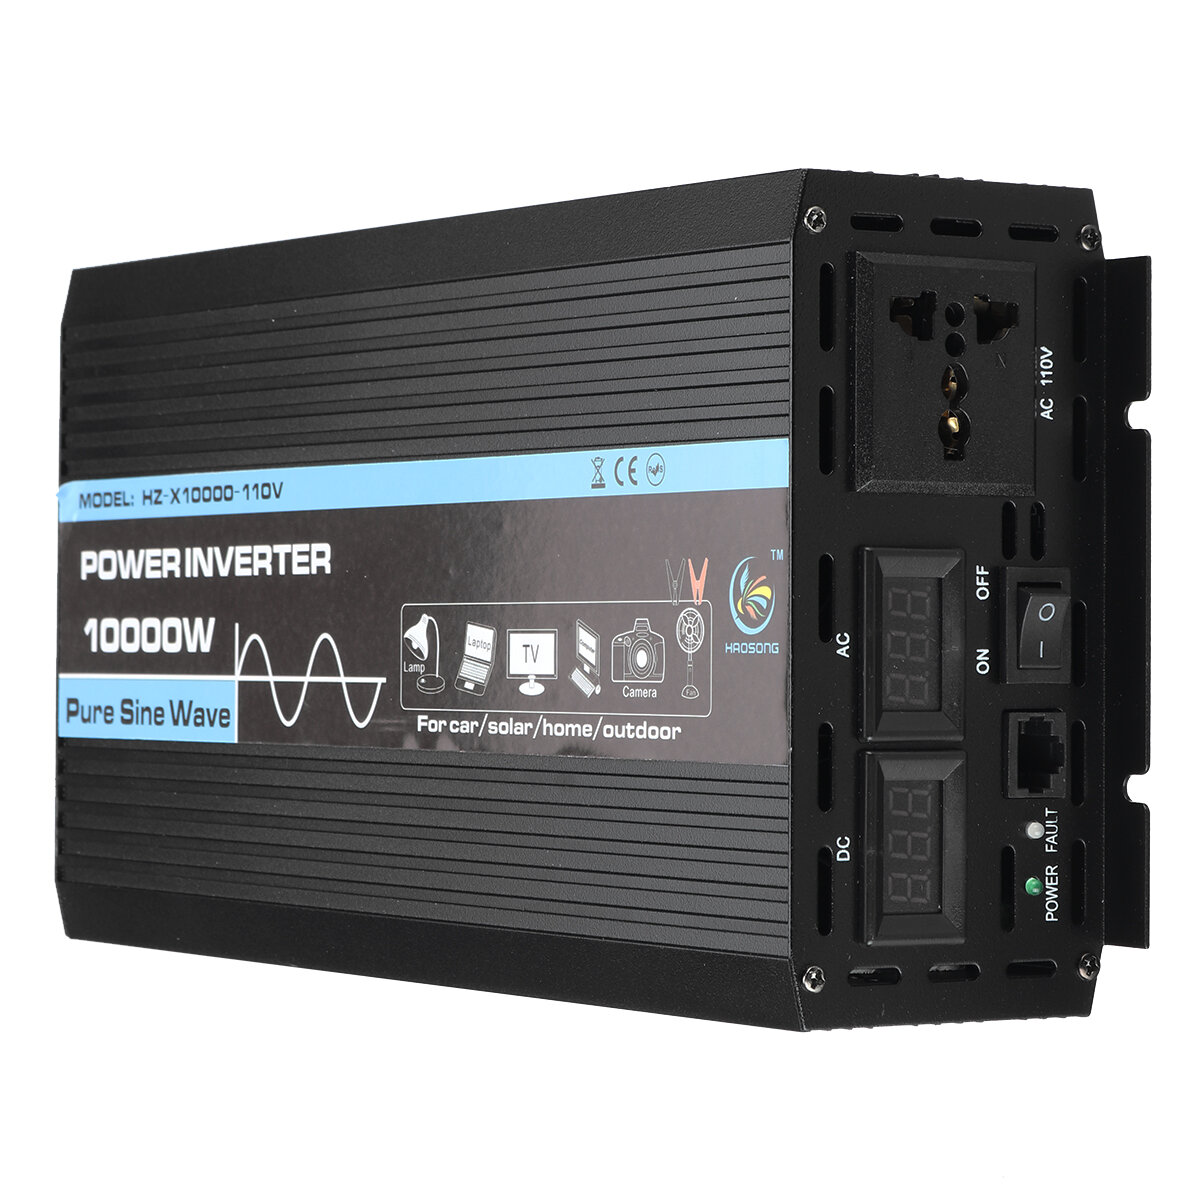 Dual Display 3000W Pure Sine Wave Inverter Car Household Power Inverter DC To AC Converter